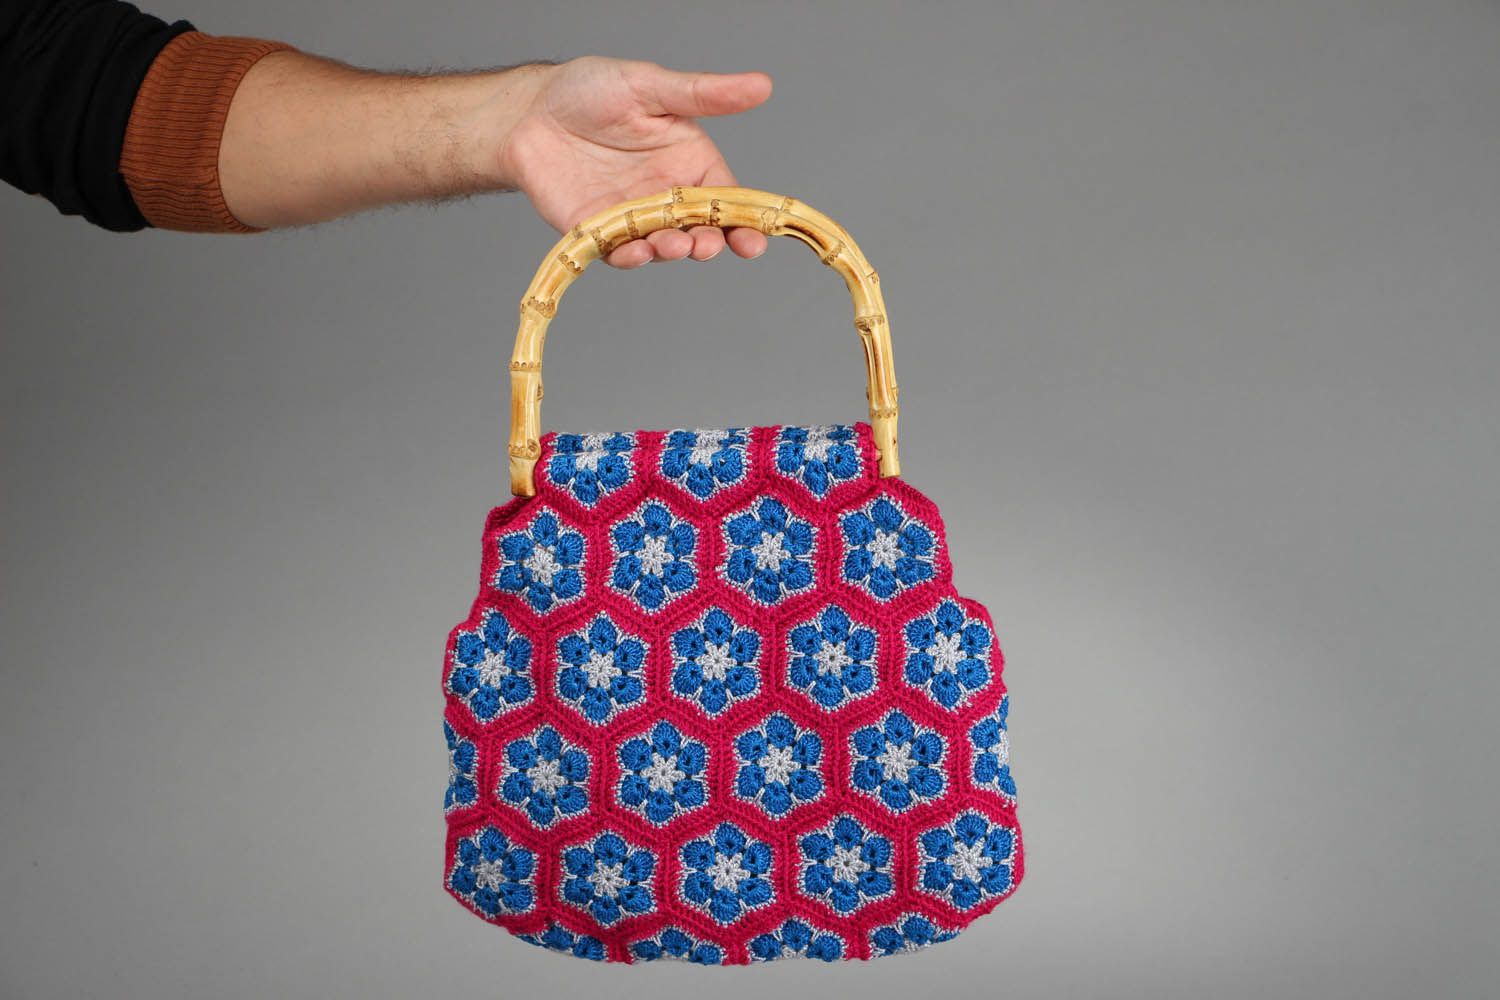 Blue and red crochet purse photo 5